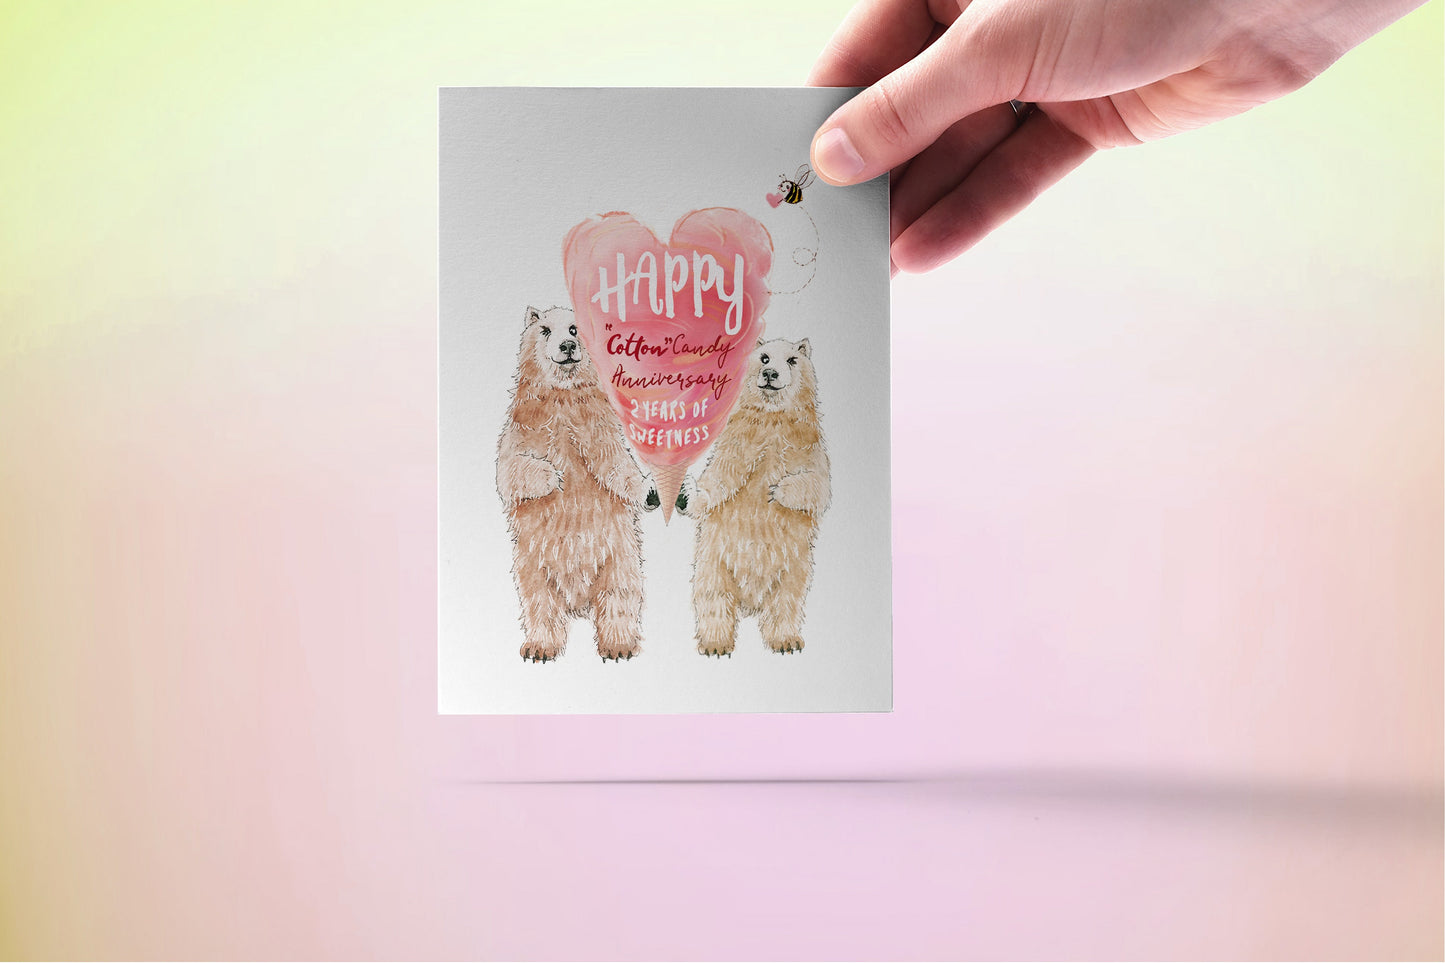 Polar Bear Couple Cotton Anniversary Card For Husband - Cotton Candy 2 Years Sweetness - 2nd Anniversary Gift For Boyfriend